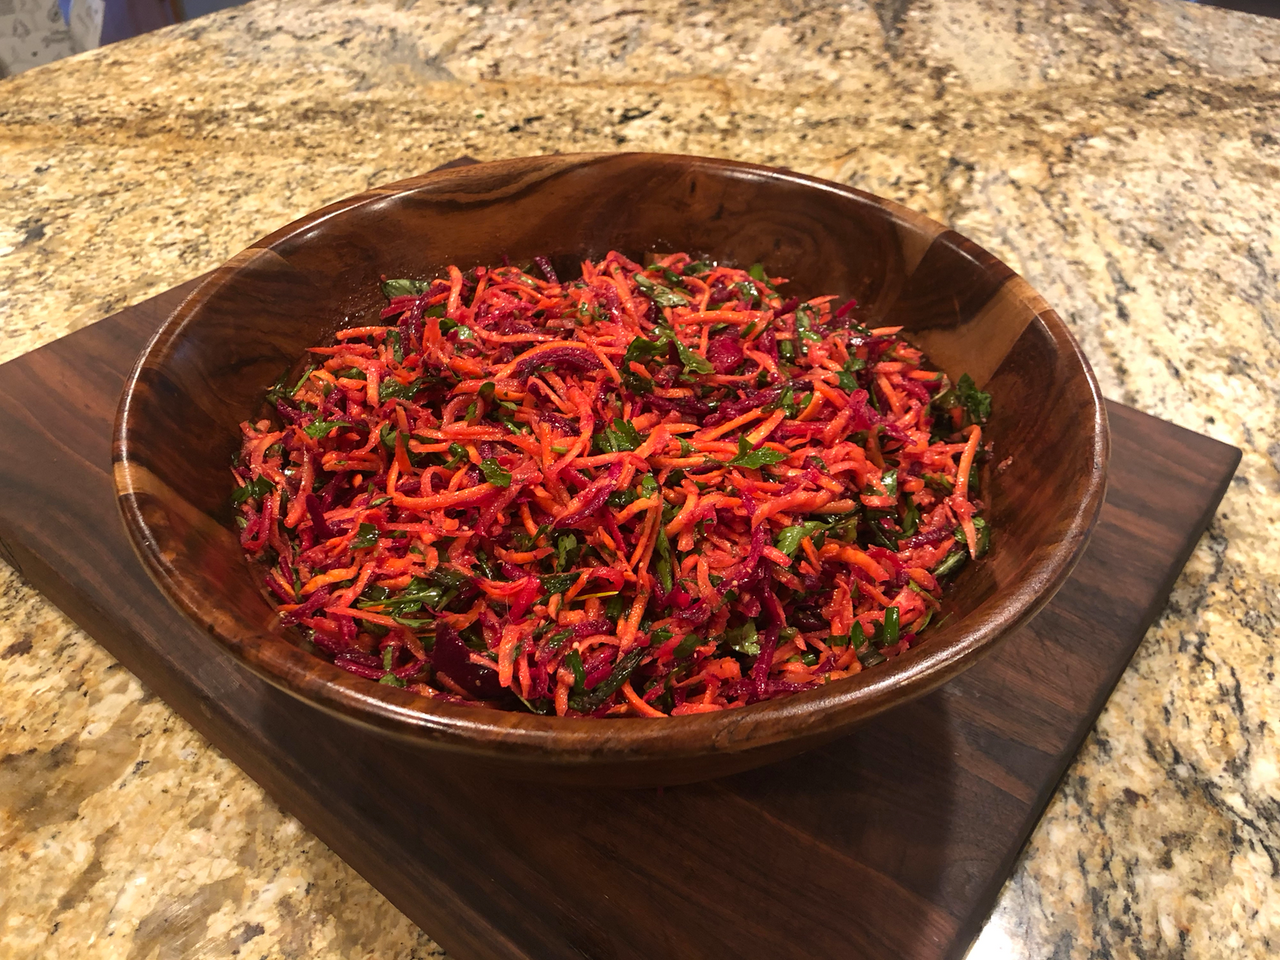 Thumbnail for Carrot Beet Salad with Herbs and Vinaigrette